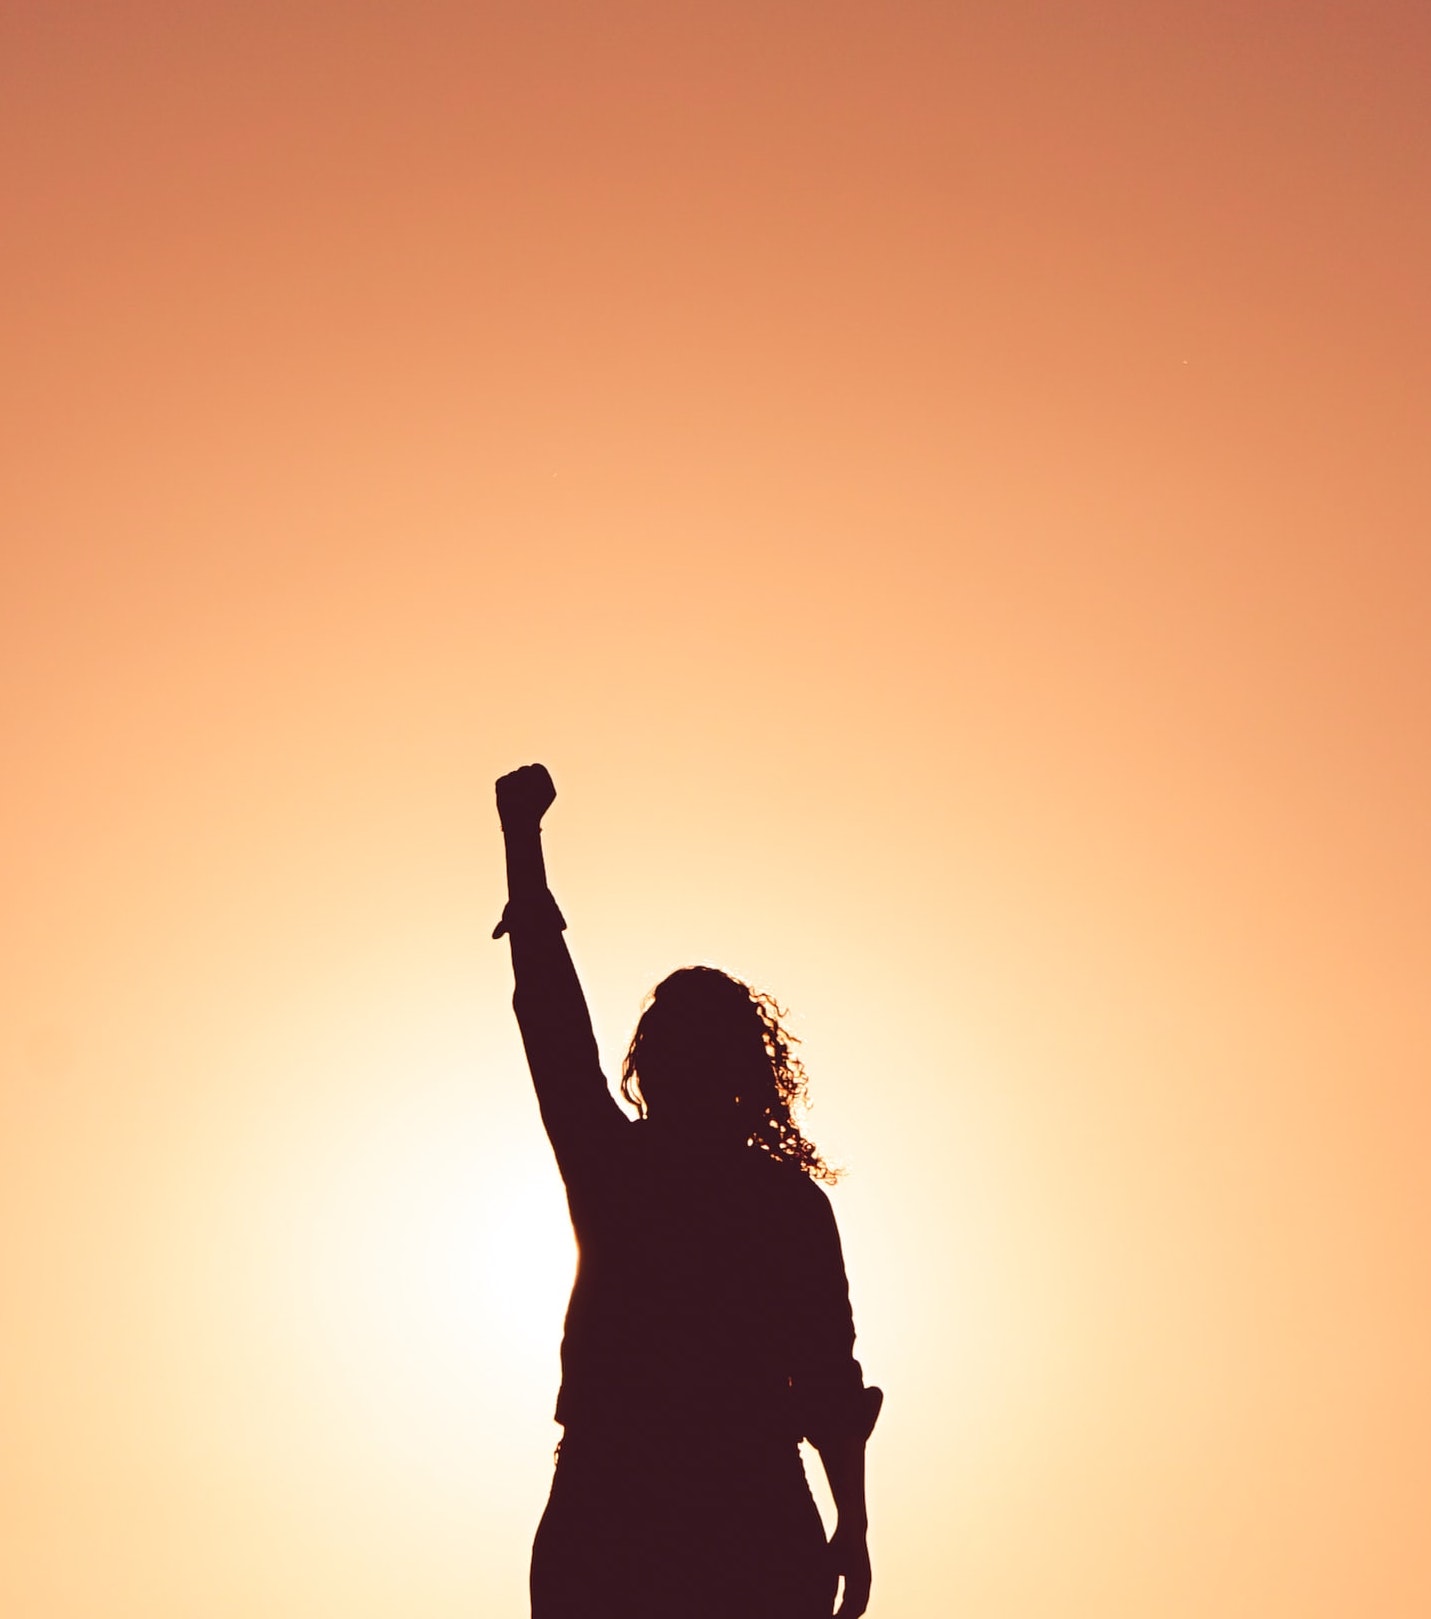 Photograph of woman holding up a fist